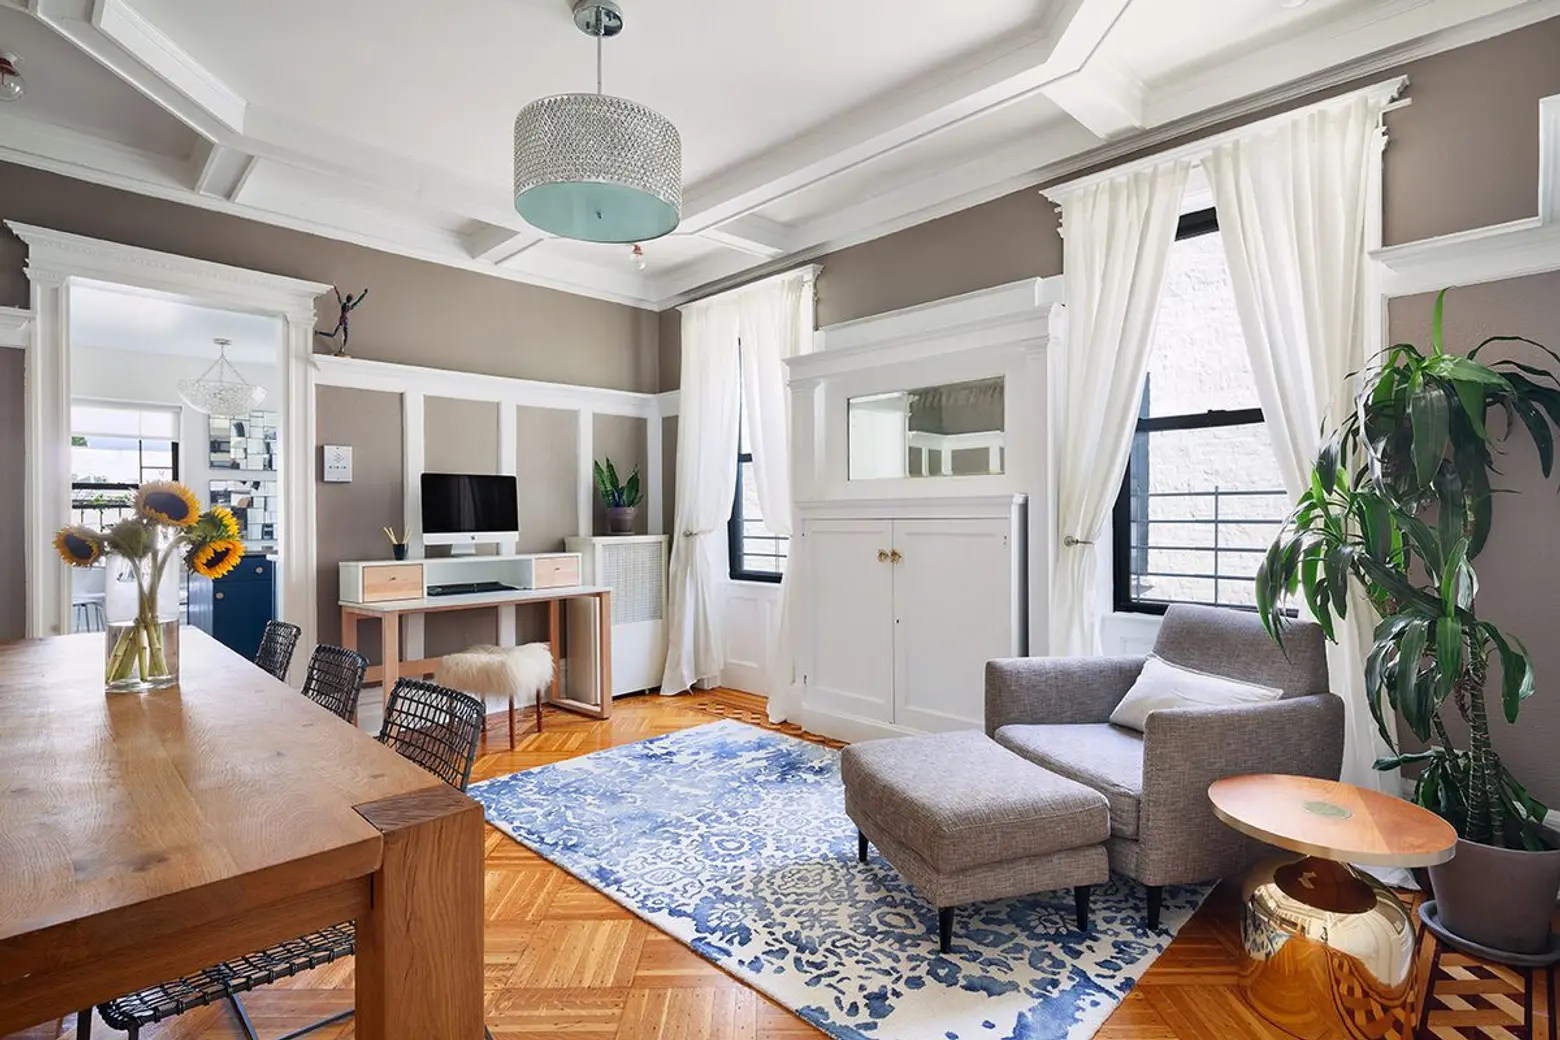 This $1.6M South Slope townhouse condo has grown-up style and room for the whole family